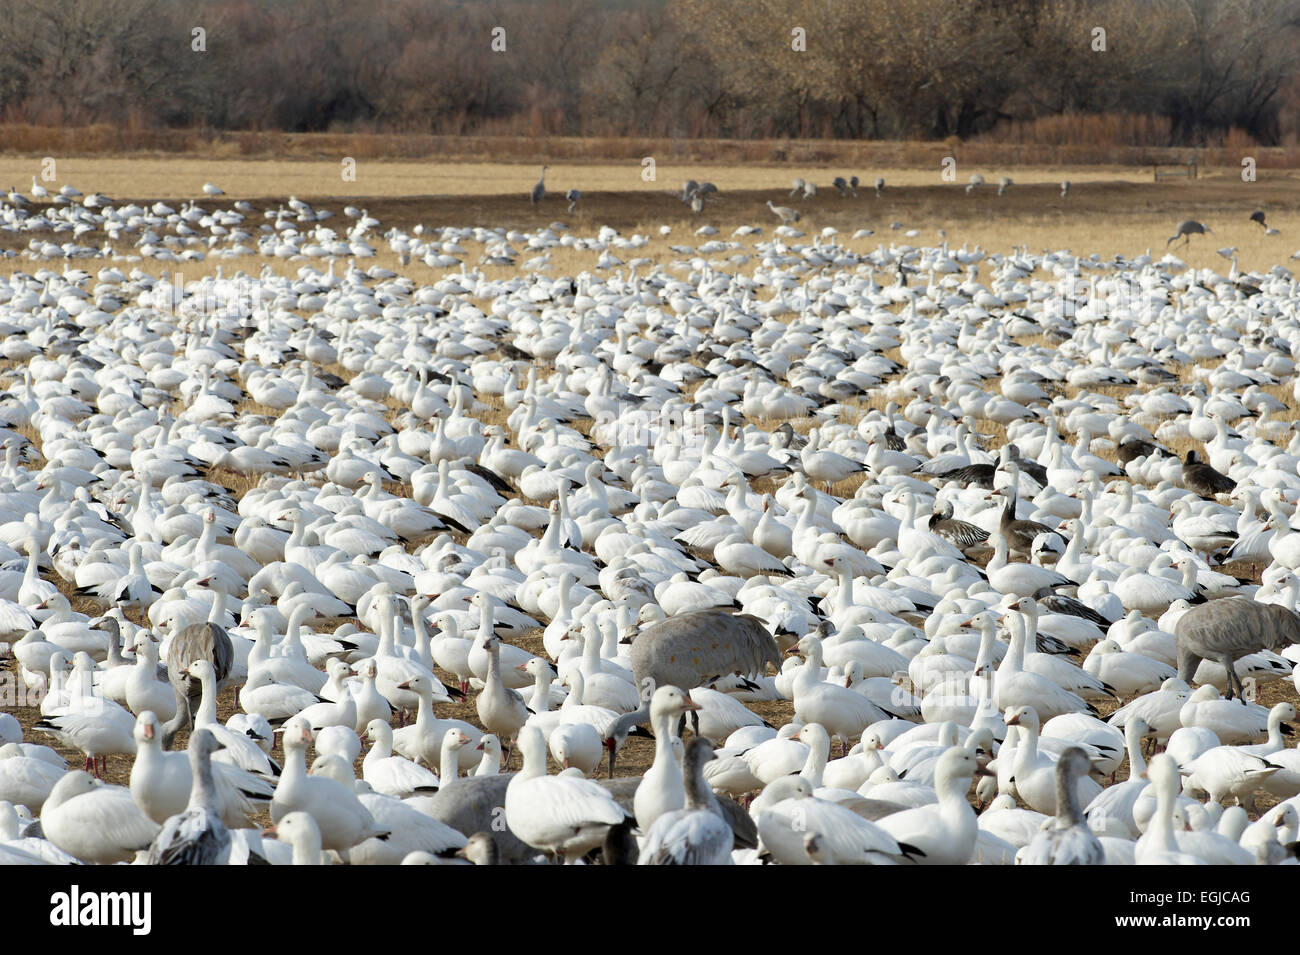 A group of snow geese in a field of Bosque Del Apache in New Mexico, USA Stock Photo